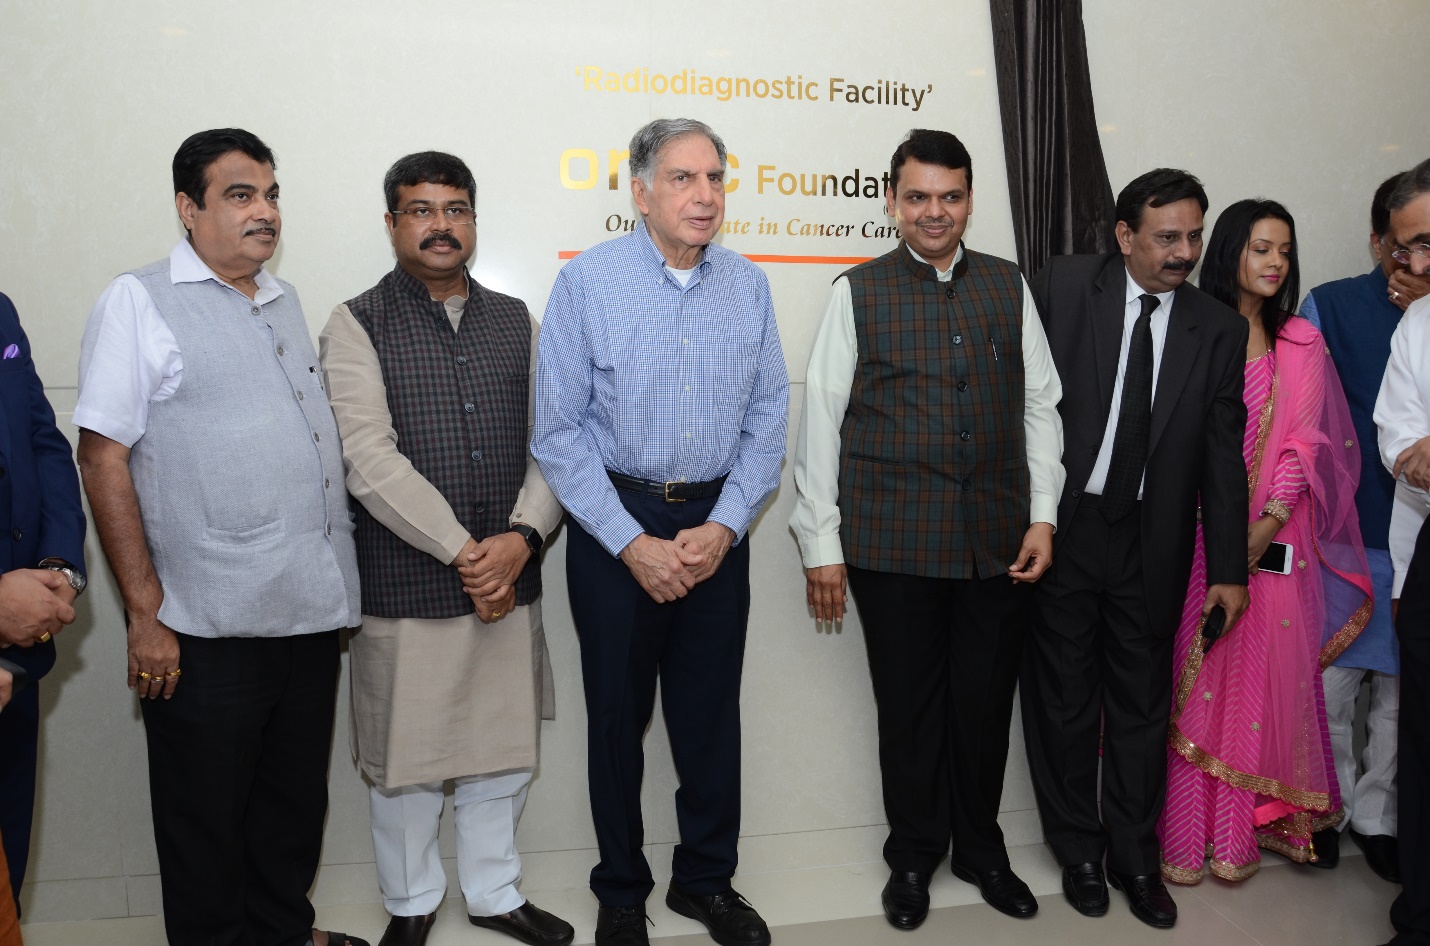 ONGC Foundation extends support of Rs 100 crore to provide World Class Affordable Cancer Care facilities 